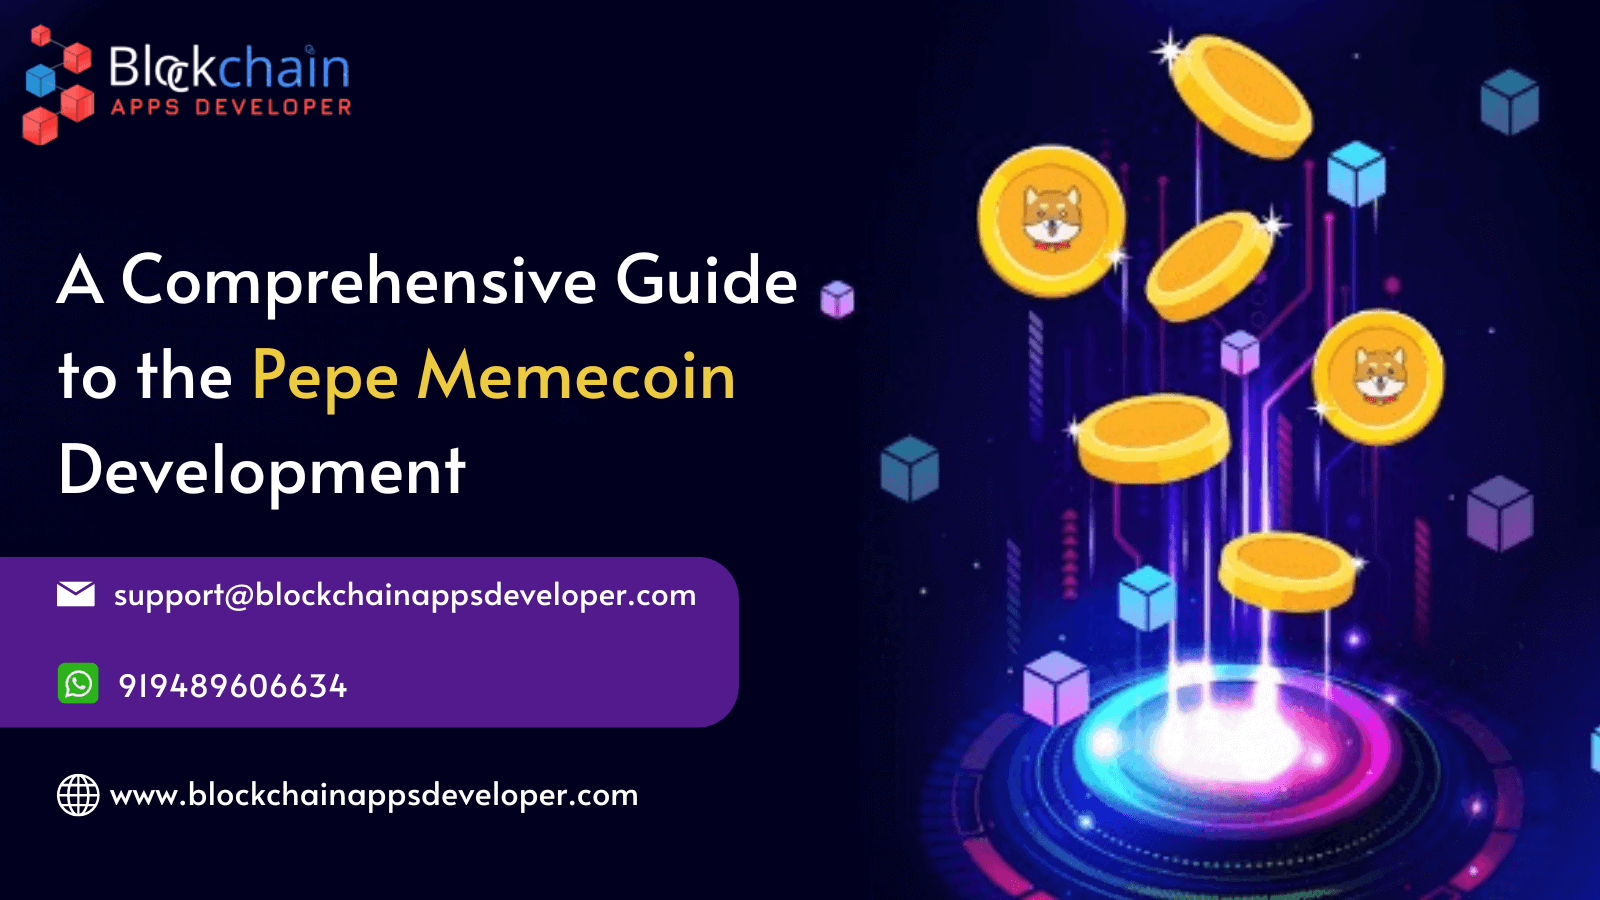 A Comprehensive Guide to the Pepe Memecoin Development